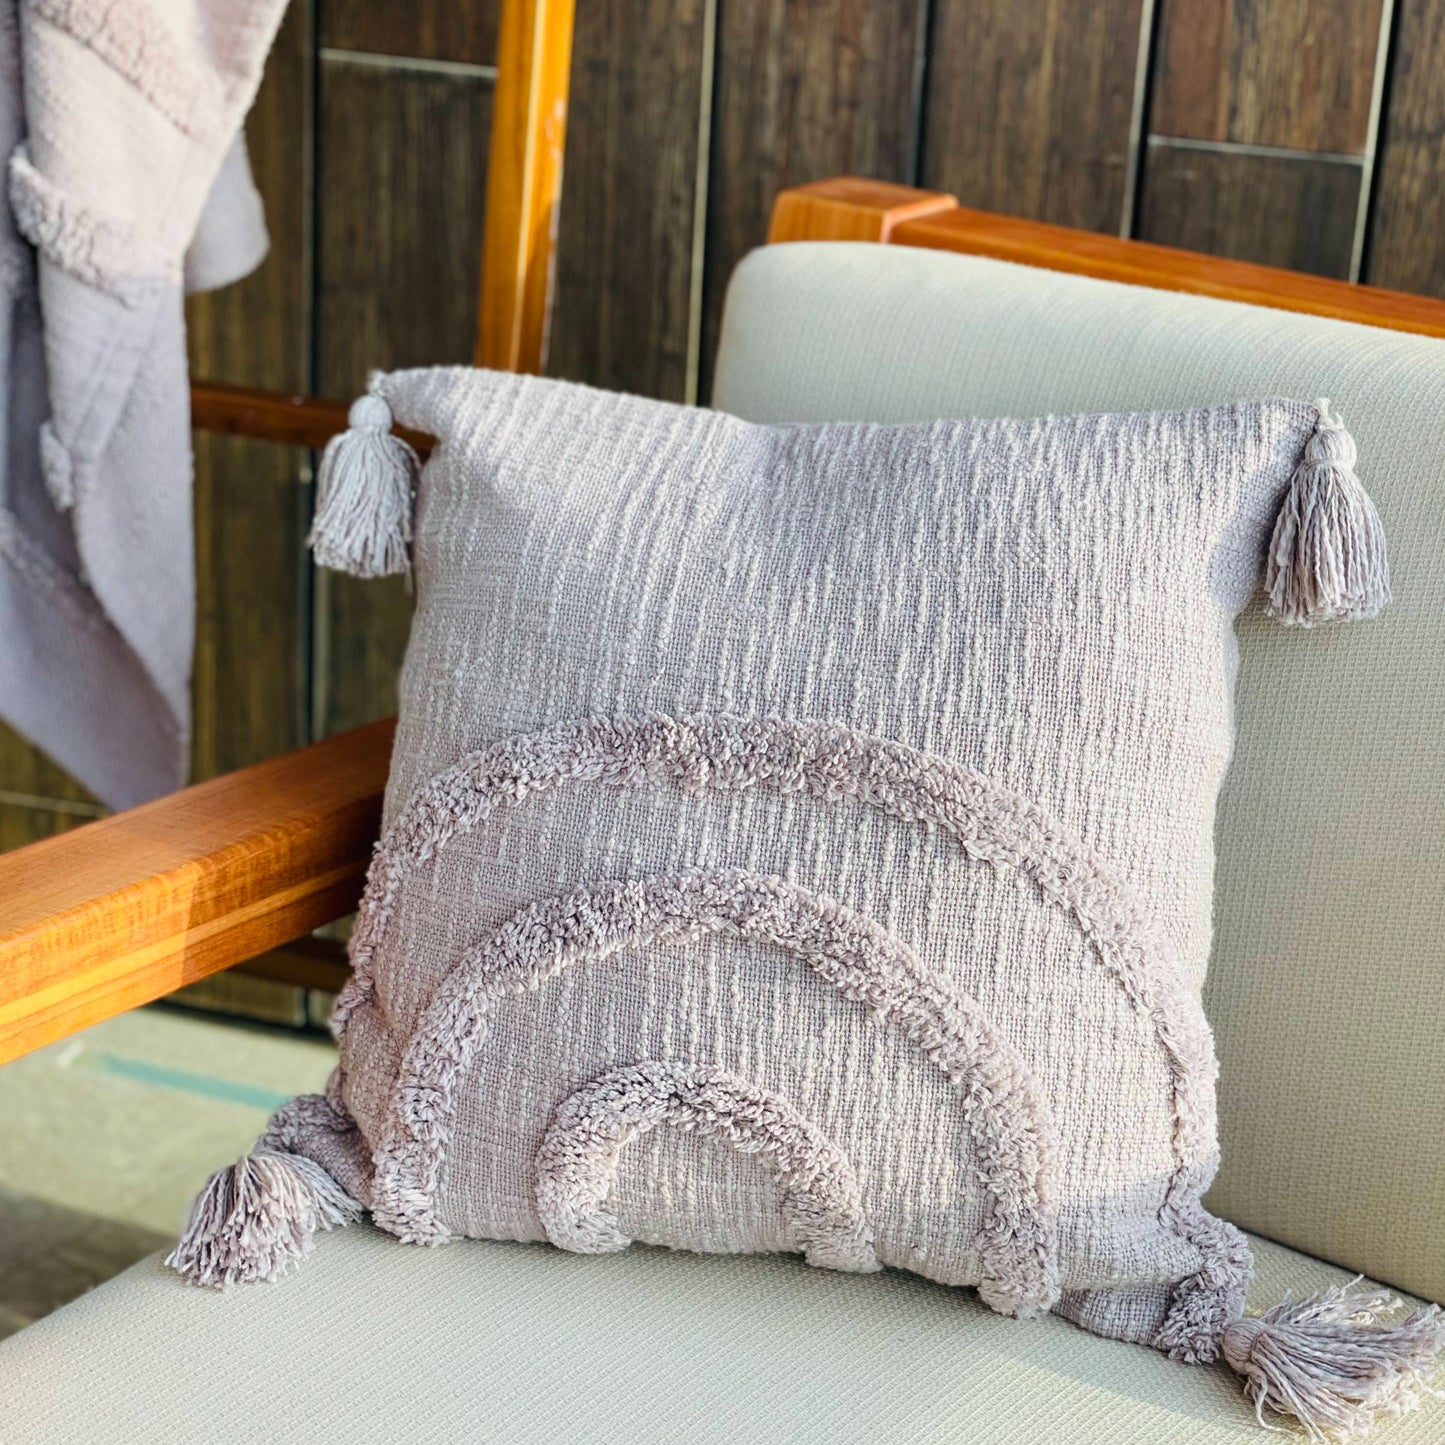 textured and tasseled chic throw pillow